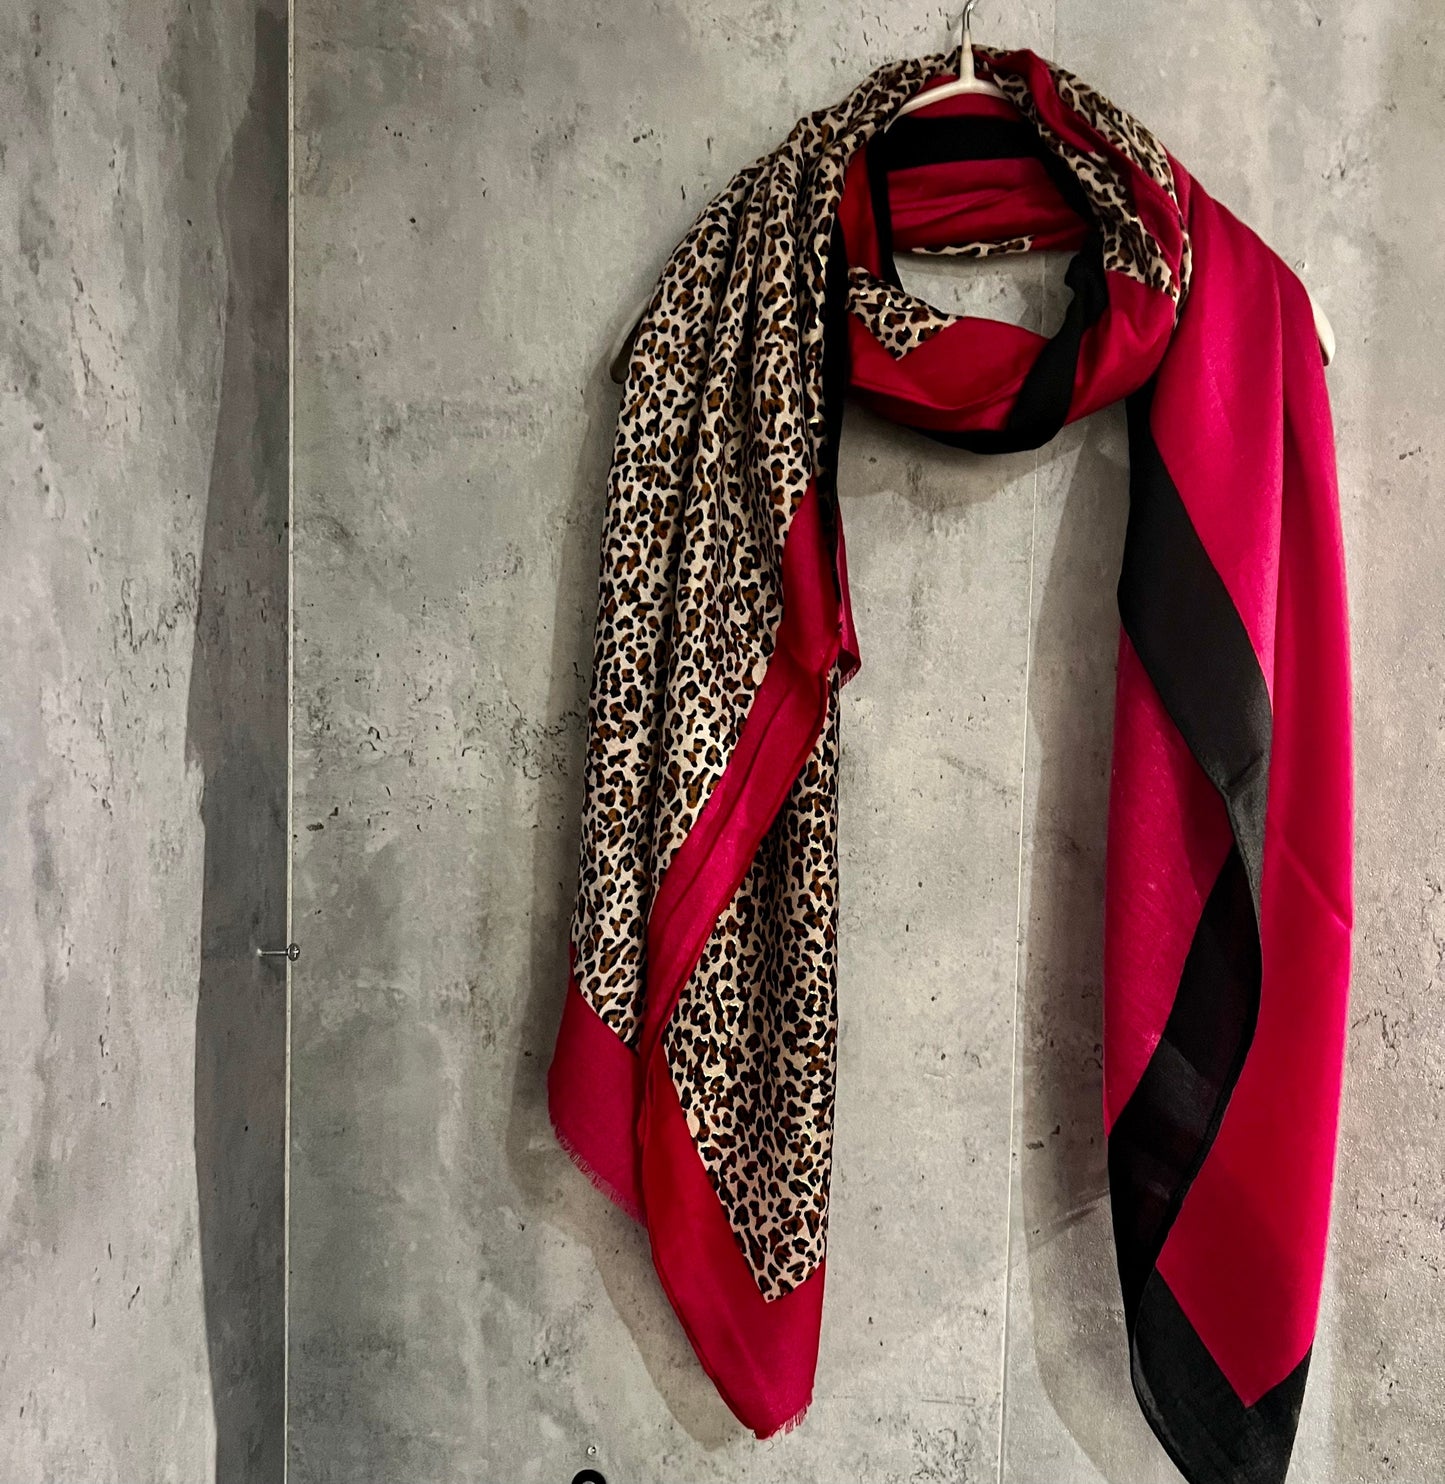 Leopard X Plain Pink Cotton Scarf/Spring Summer Autumn Scarf/Gifts For Mum/Gifts For Her/Gifts For Birthday Christmas/UK Seller